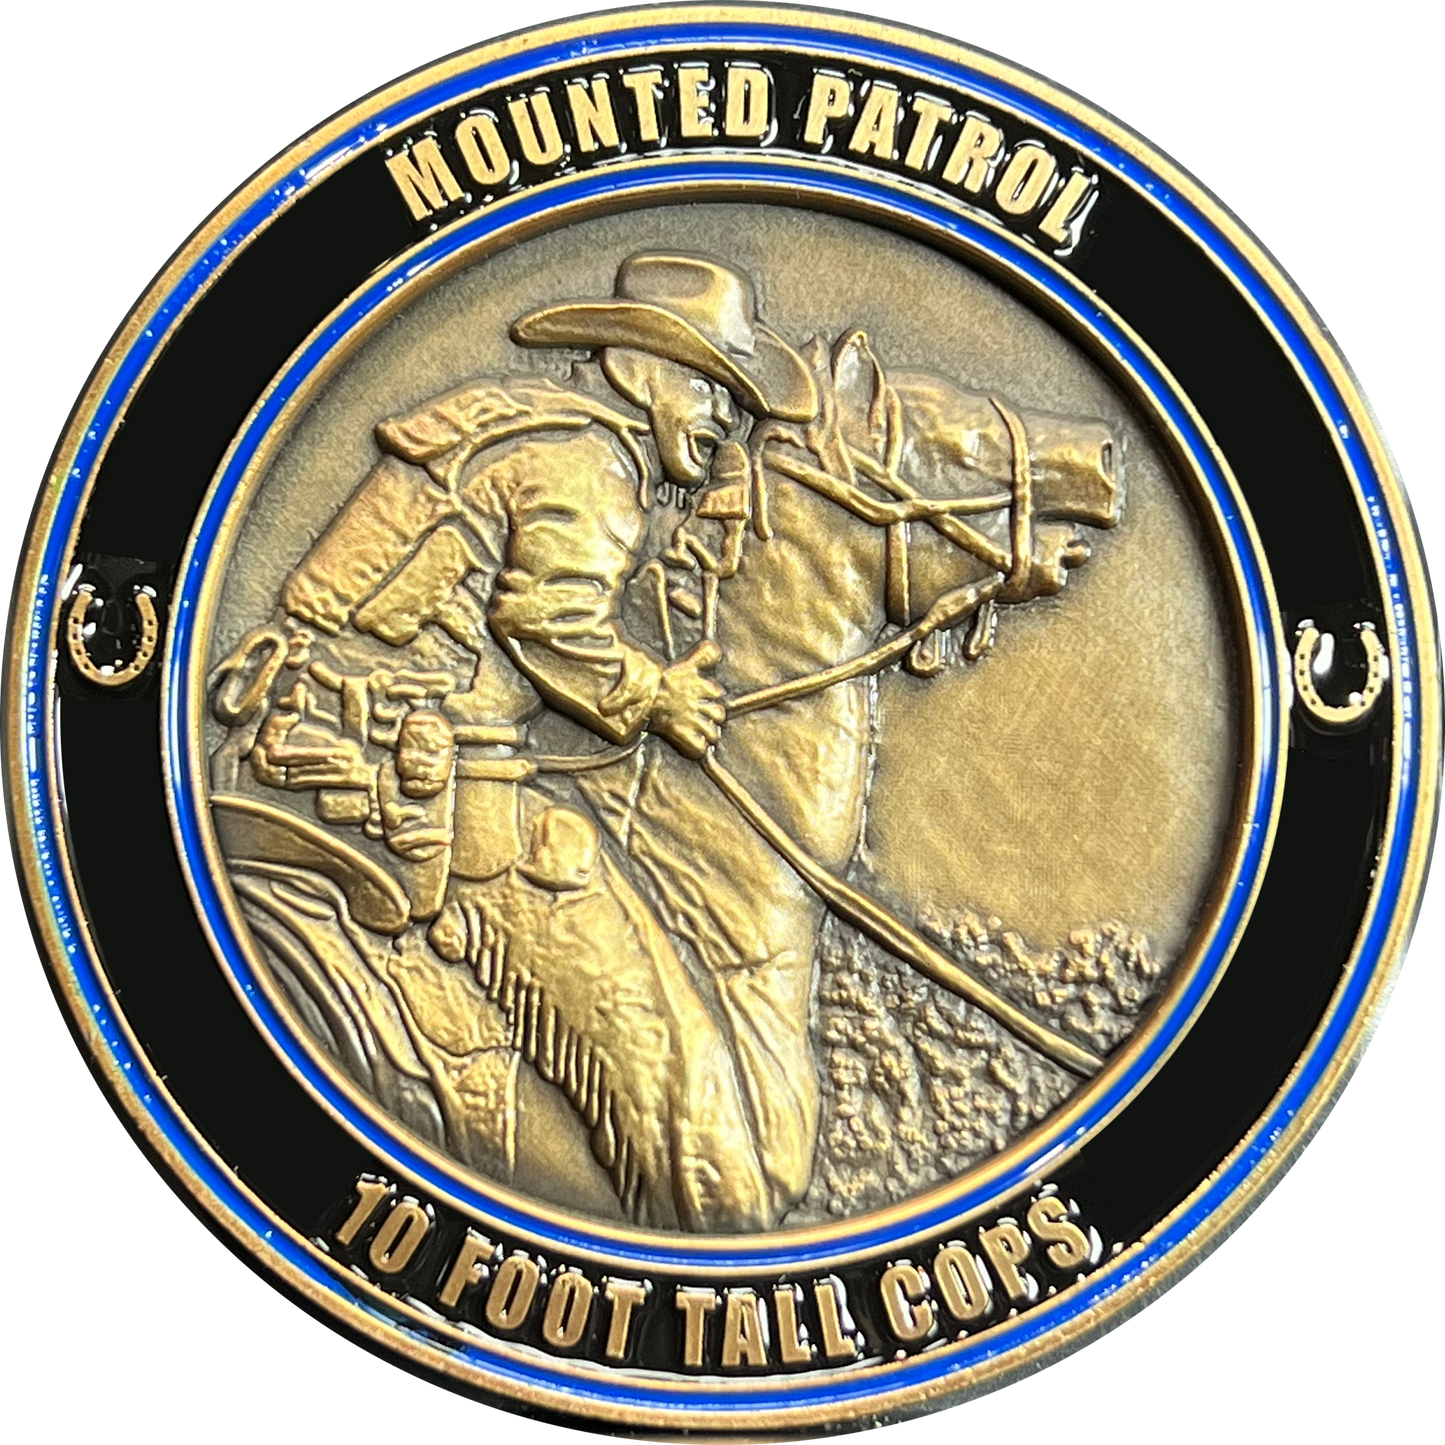 discontinued GL3-004 10 Foot Tall Cops Police NYPD LAPD Davie CBP Border Patrol Horse Patrol Mounted Unit Challenge Coin